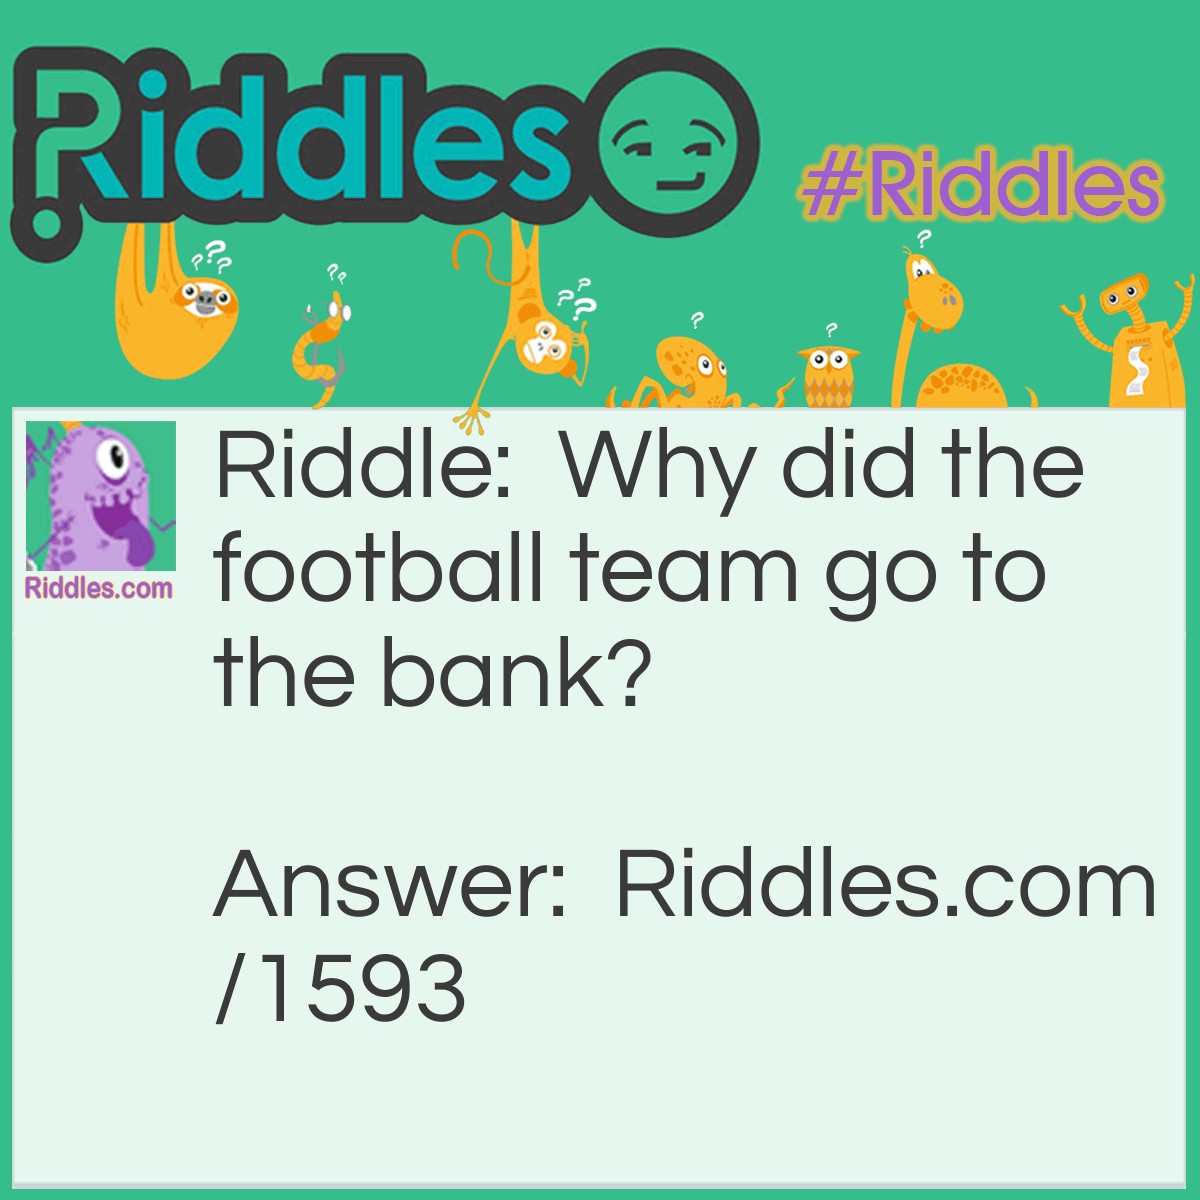 Riddle: Why did the football team go to the bank? Answer: To get a quarter back!